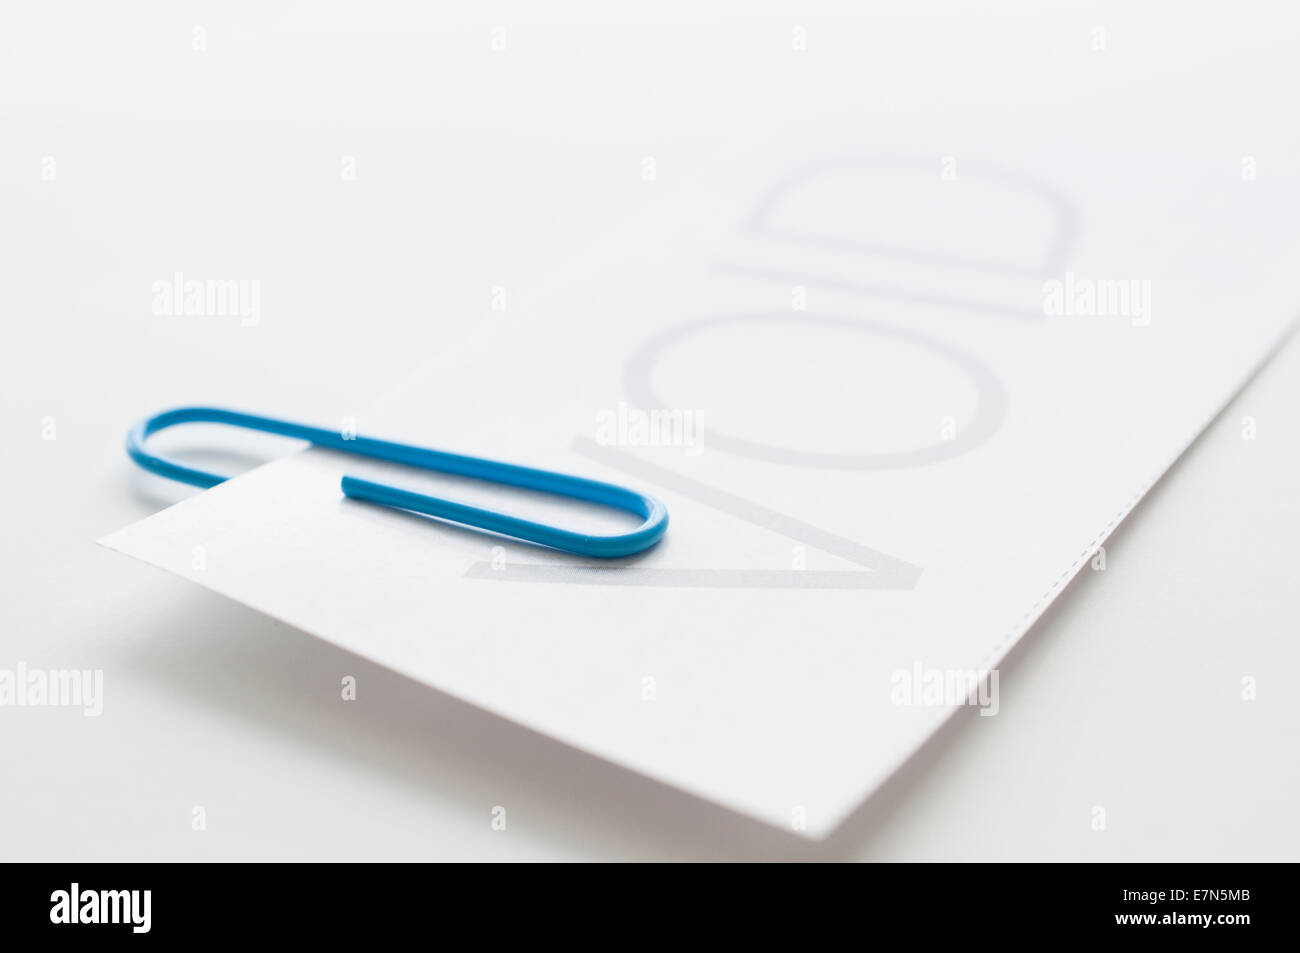 Void paper with blue paper clip on white background Stock Photo